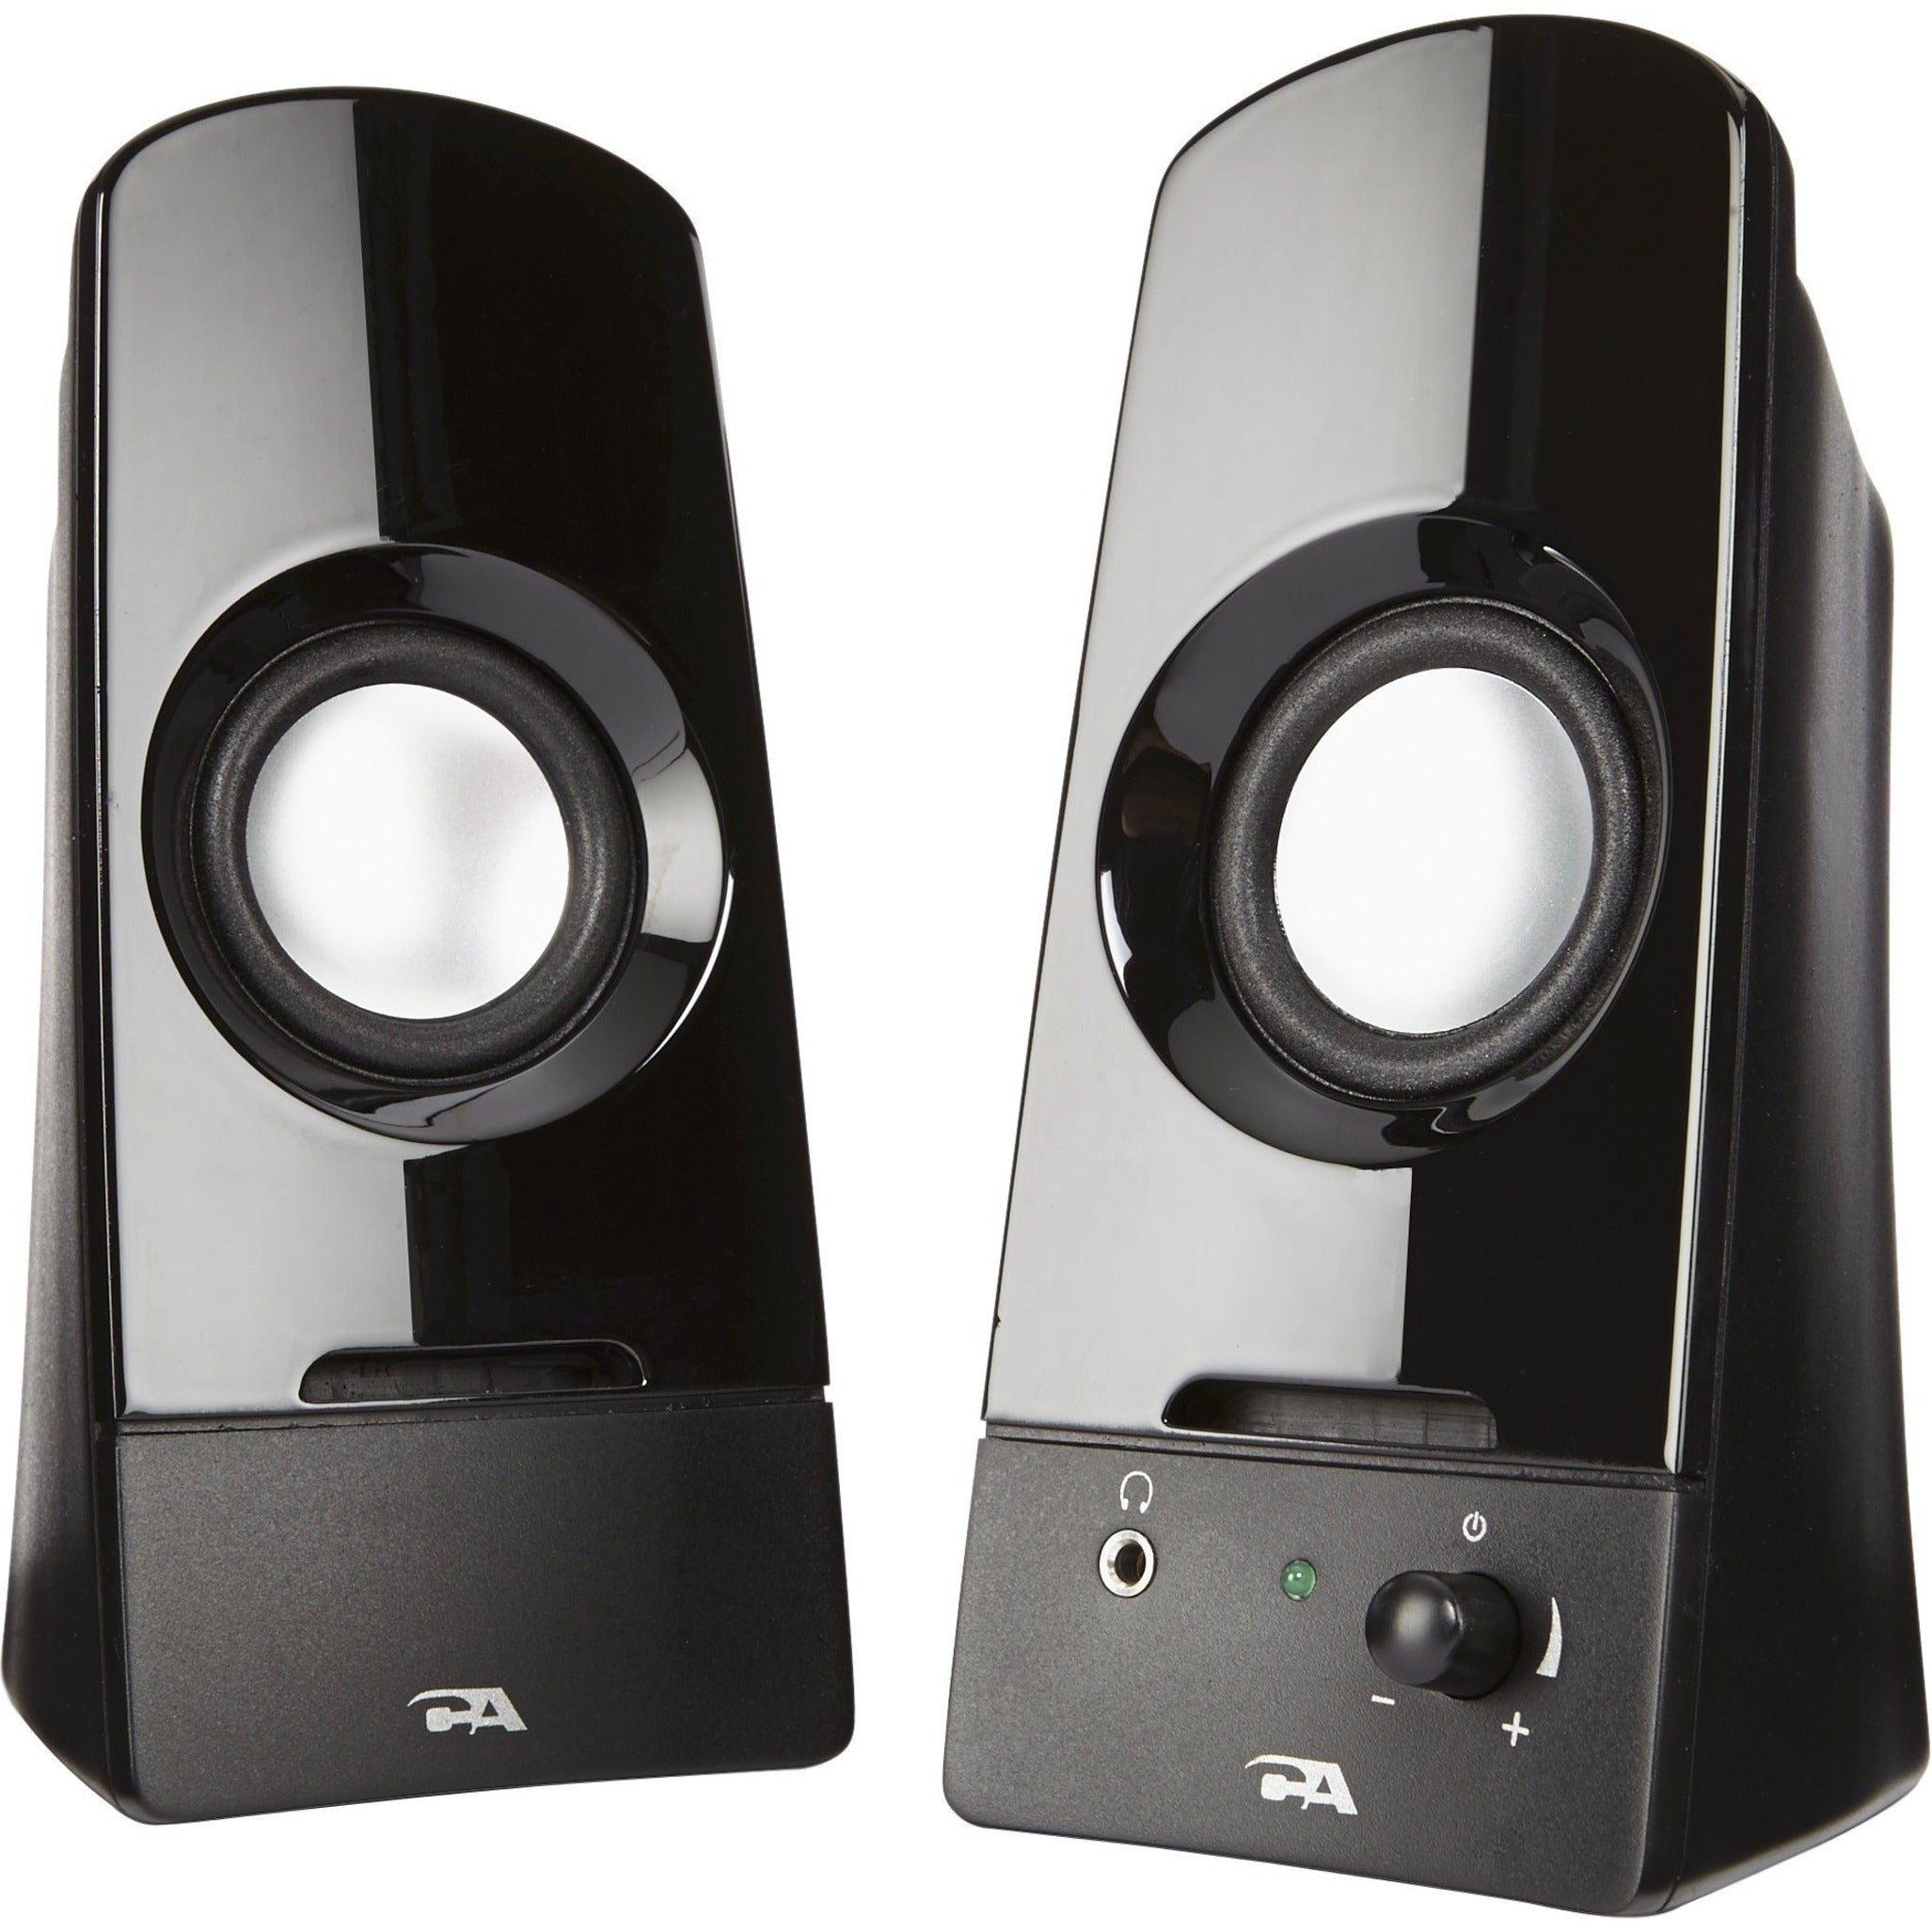 Cyber Acoustics CA-2050 Curve.Sonic 2.0 Powered Speaker System, 5W RMS, Volume Control